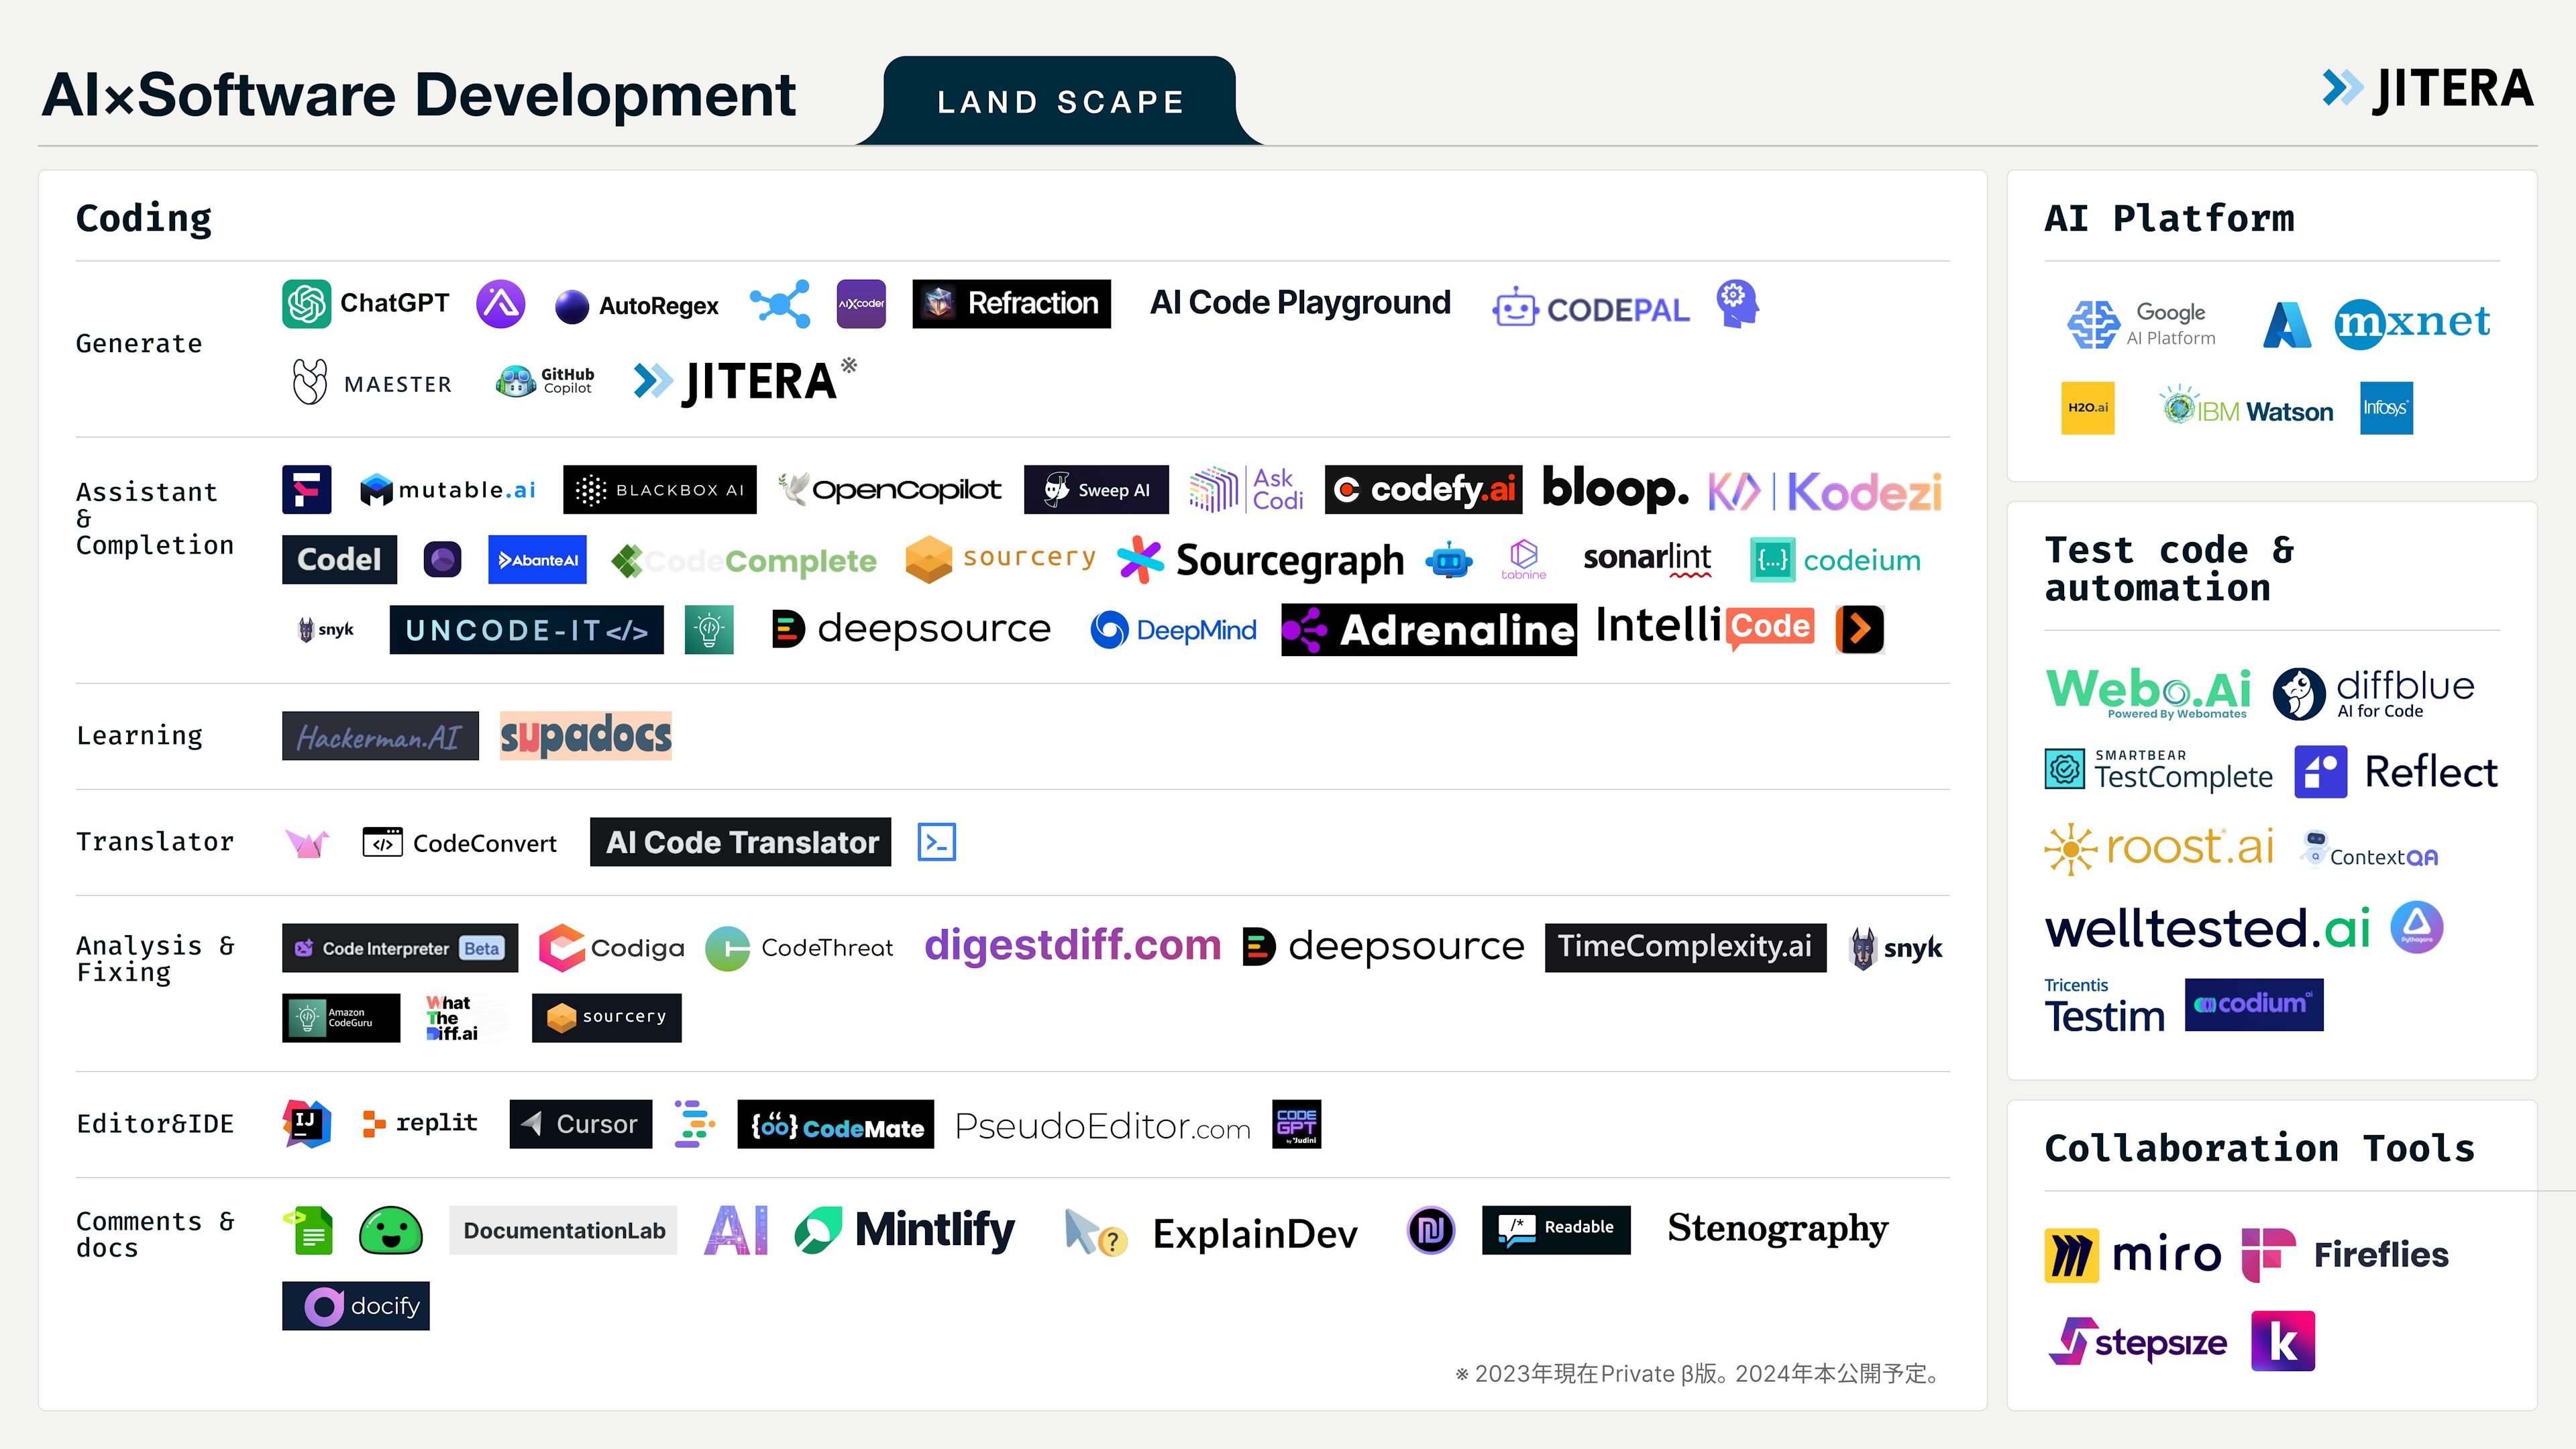 Jitera releases an landscape of "software development services using AI" for engineers.